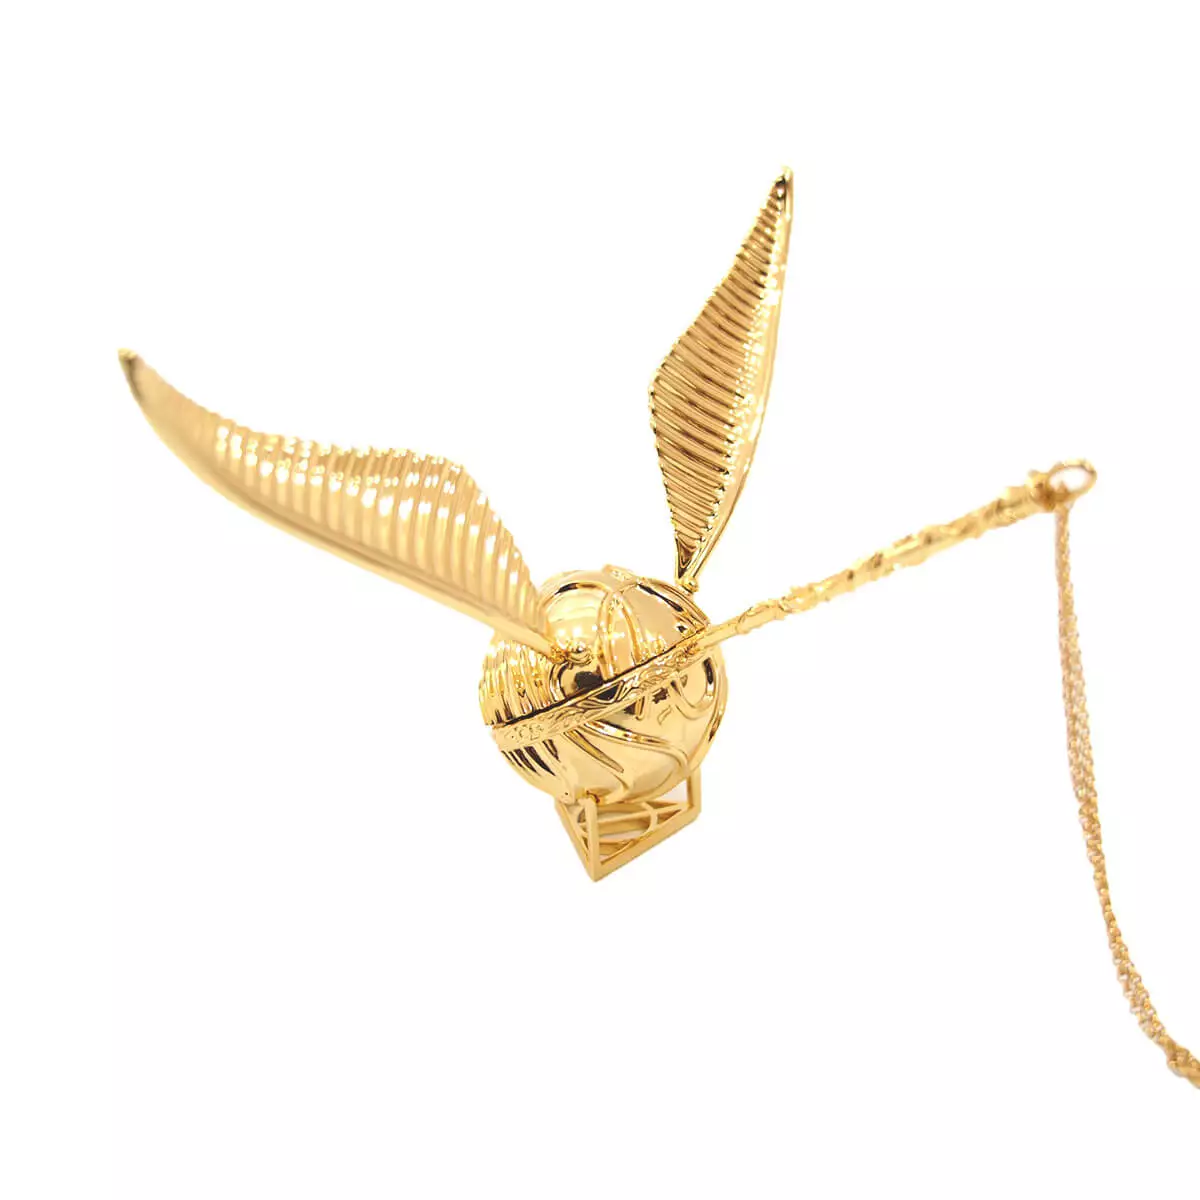 golden snitch ring box with gold wings opening method